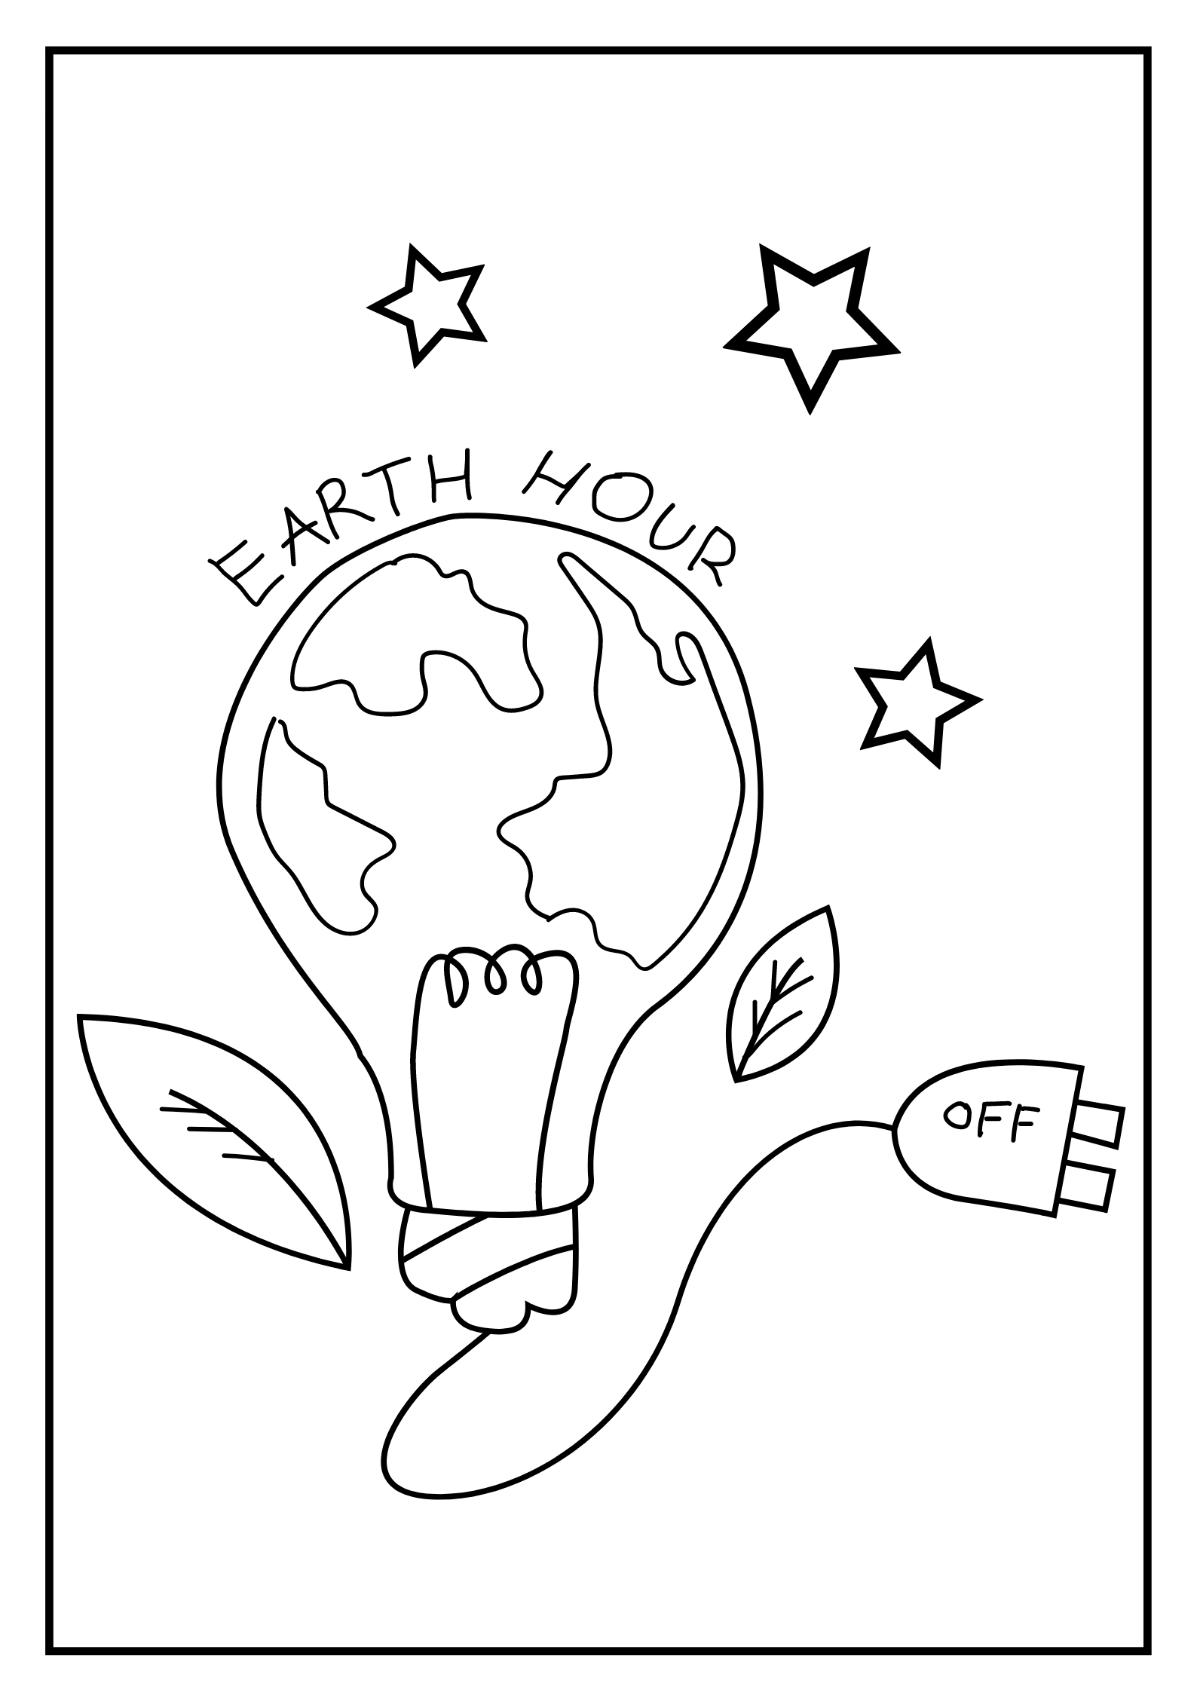 Earth Hour Image Drawing Template